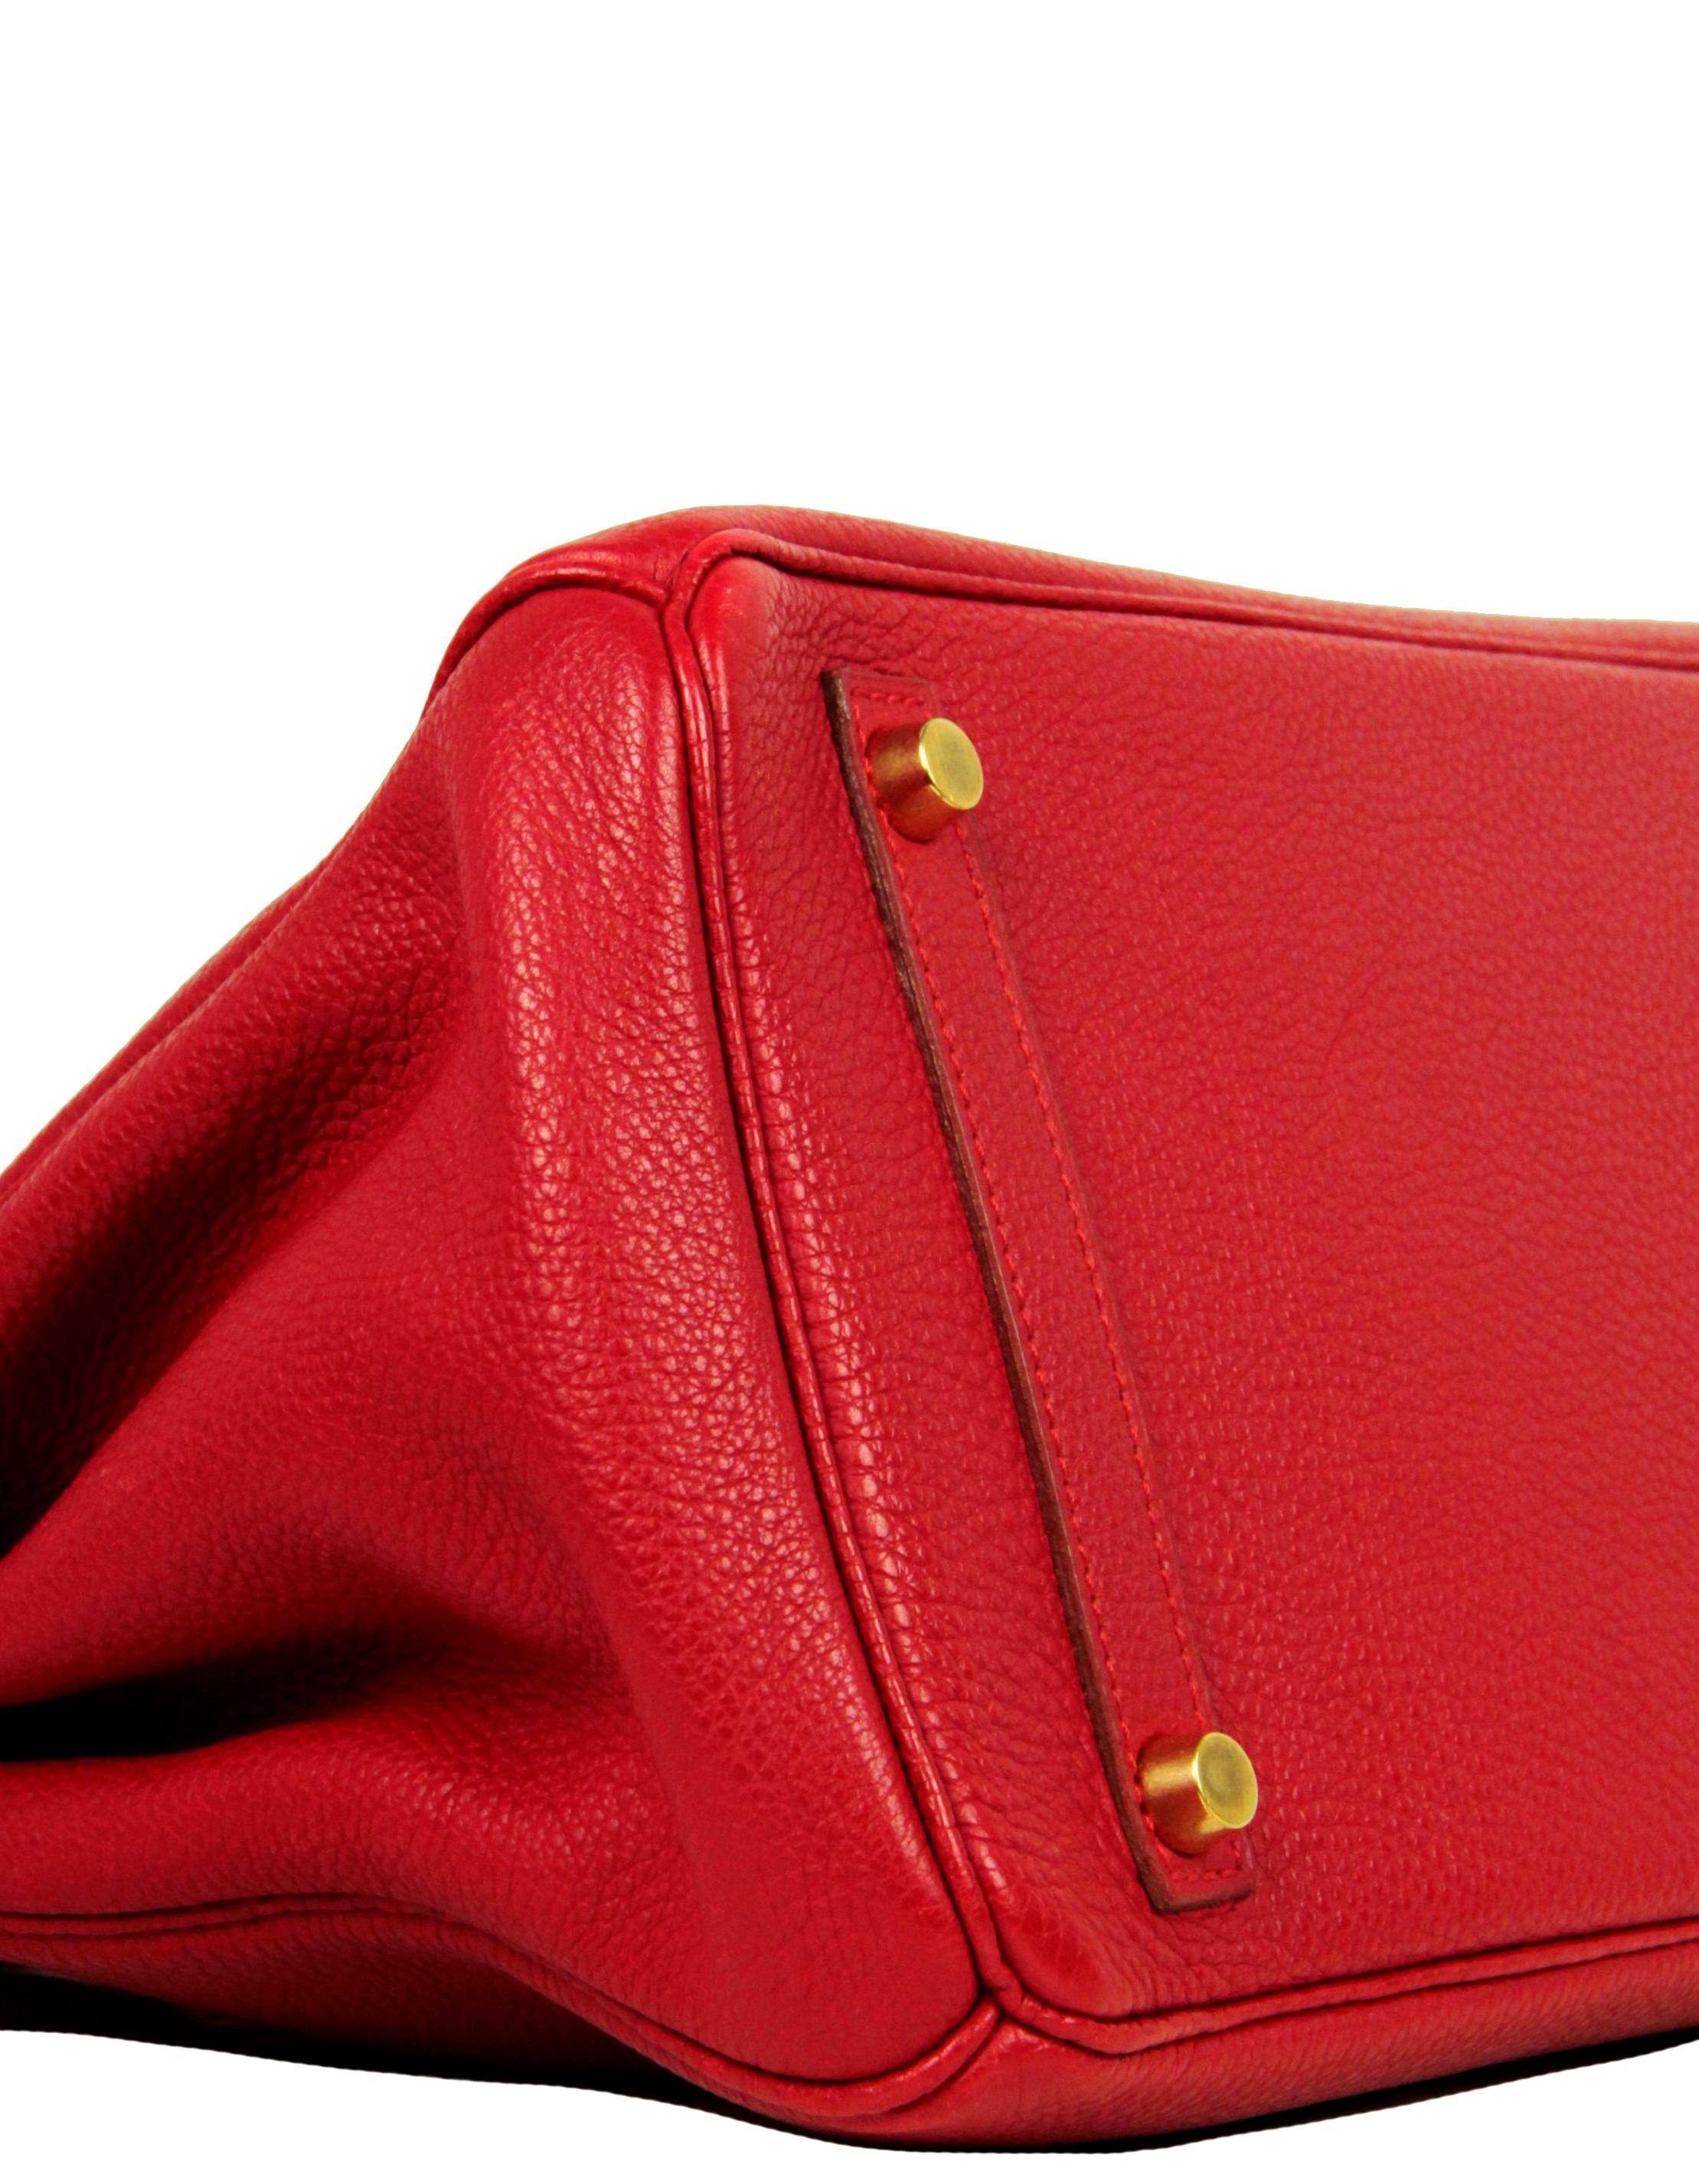 Hermes Rouge Vif Red Togo Leather 30cm Birkin Bag GHW In Good Condition In New York, NY